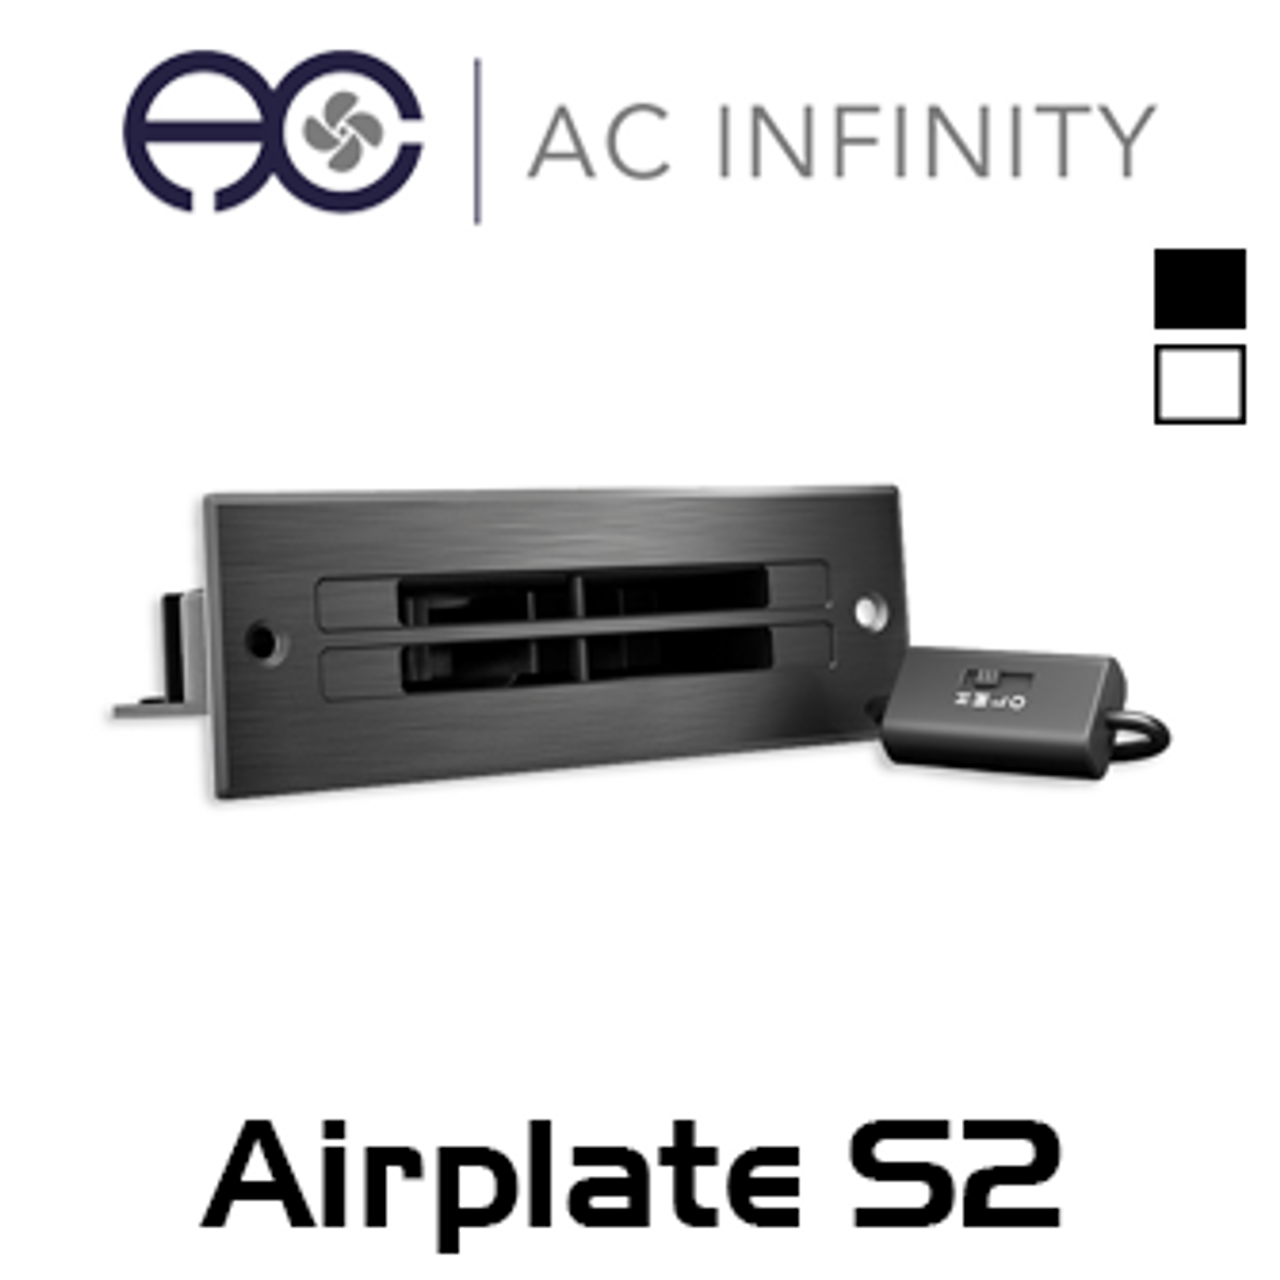 Ac Infinity Airplate S2 80mm Av Cabinet Quiet Cooling Blower